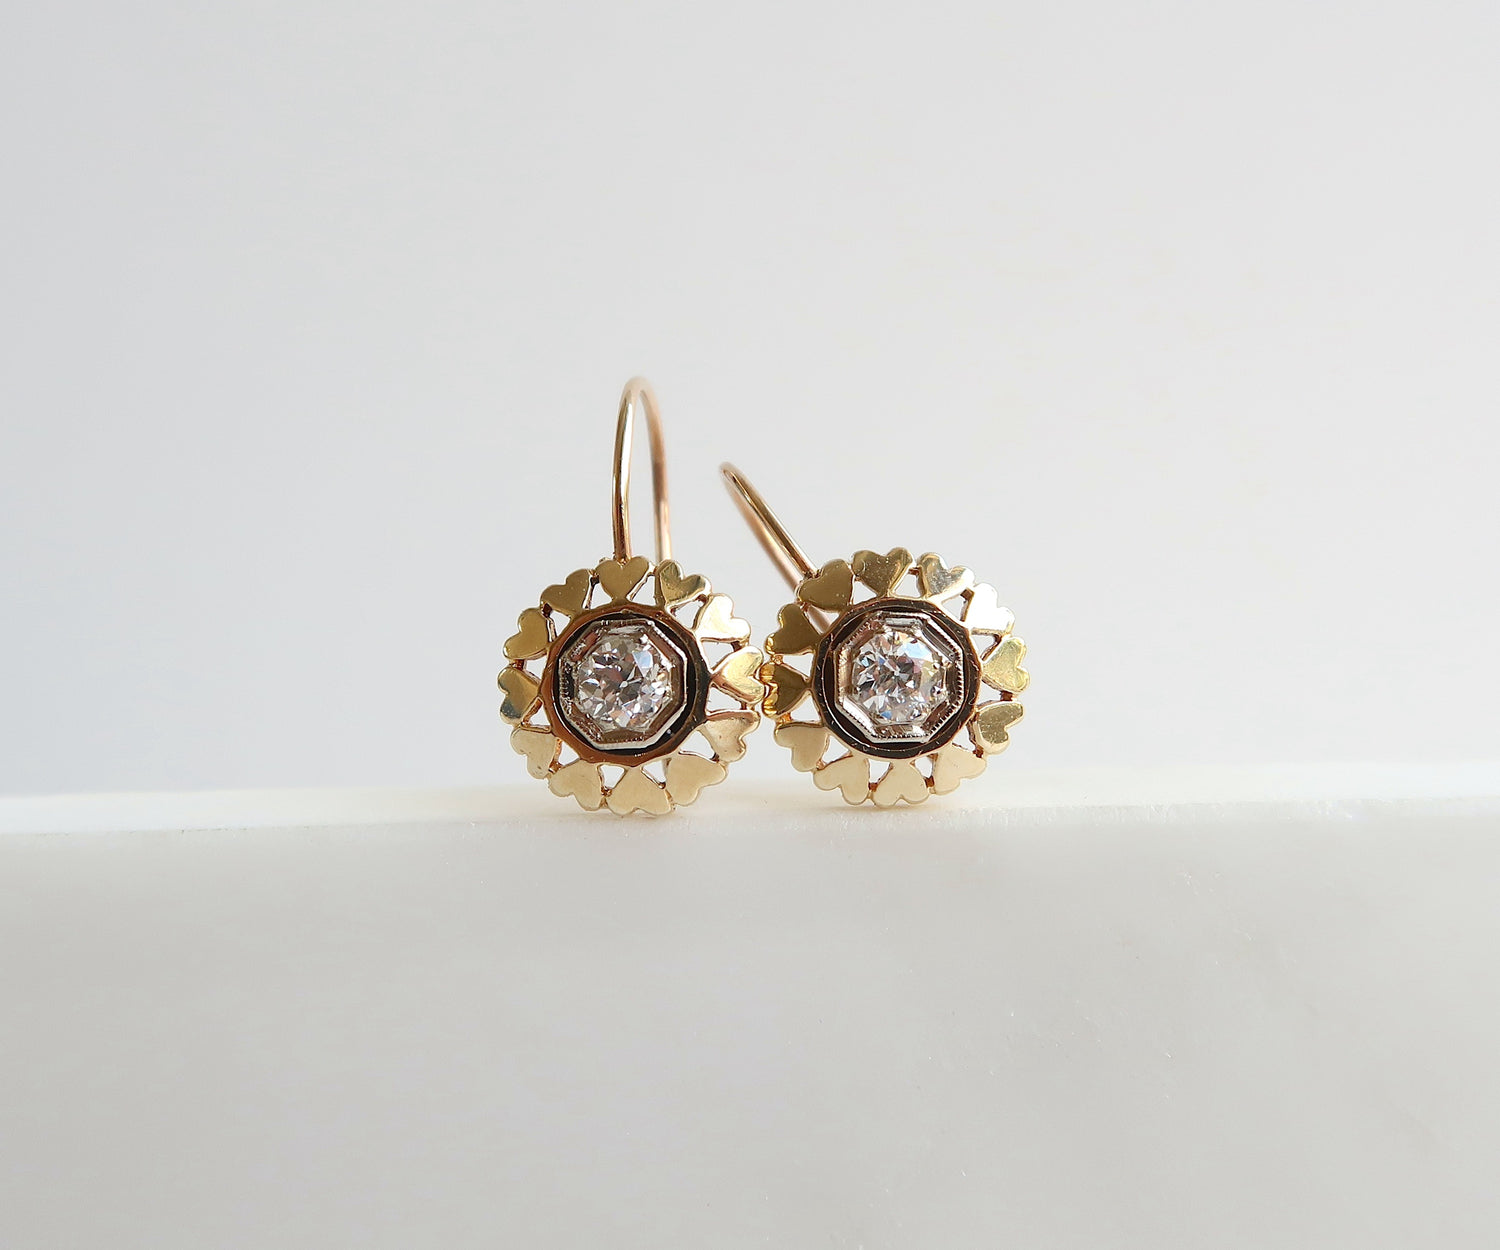 Diamond and Gold Earrings with heart motif